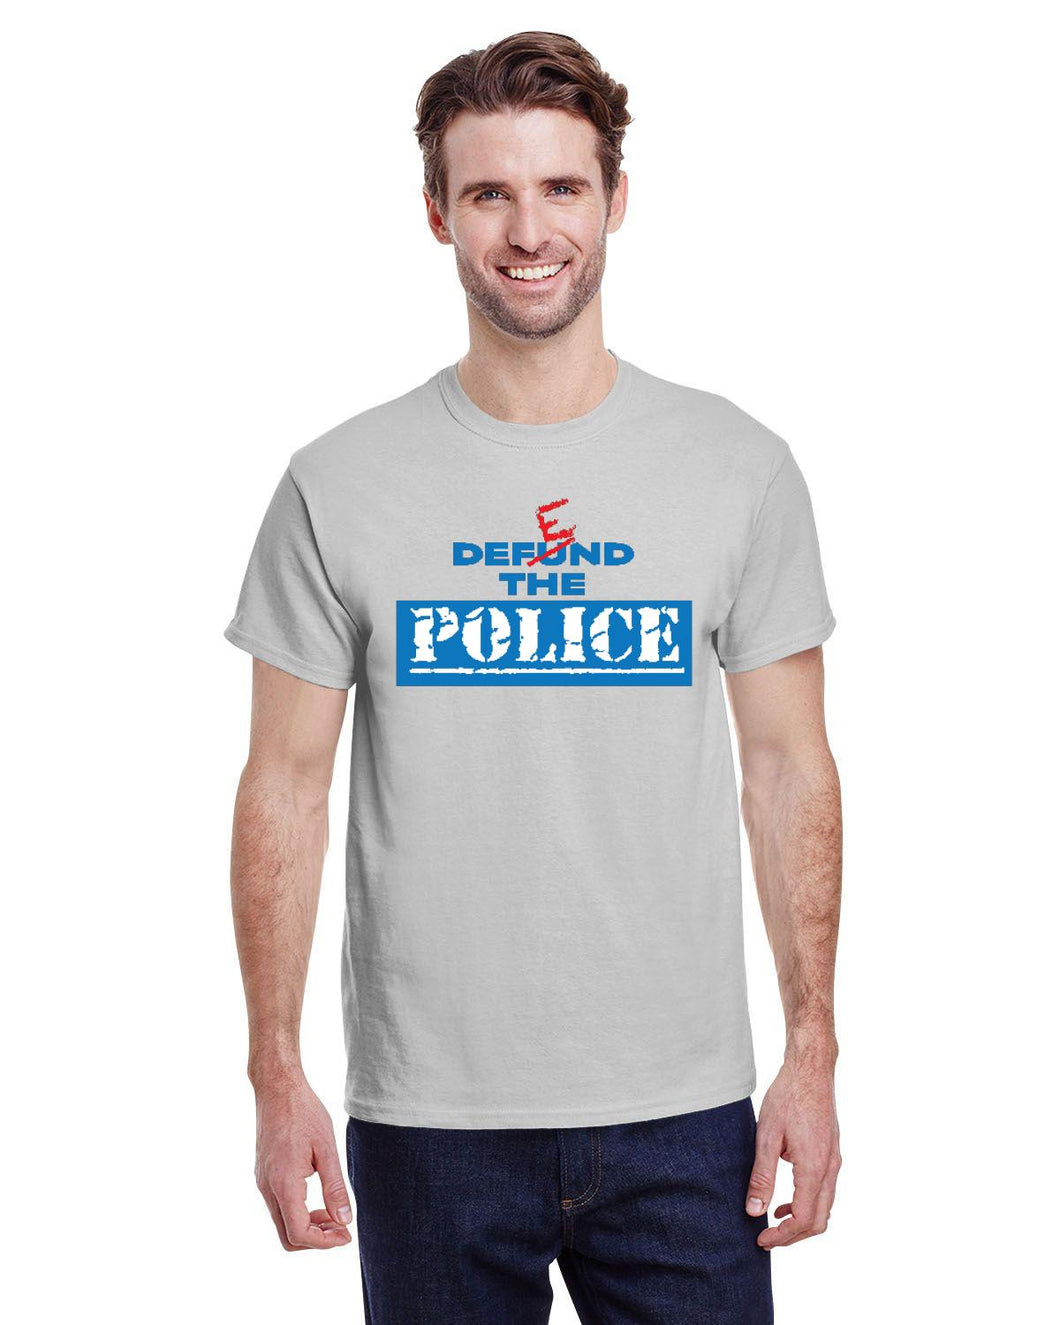 Defend The Police T-shirt